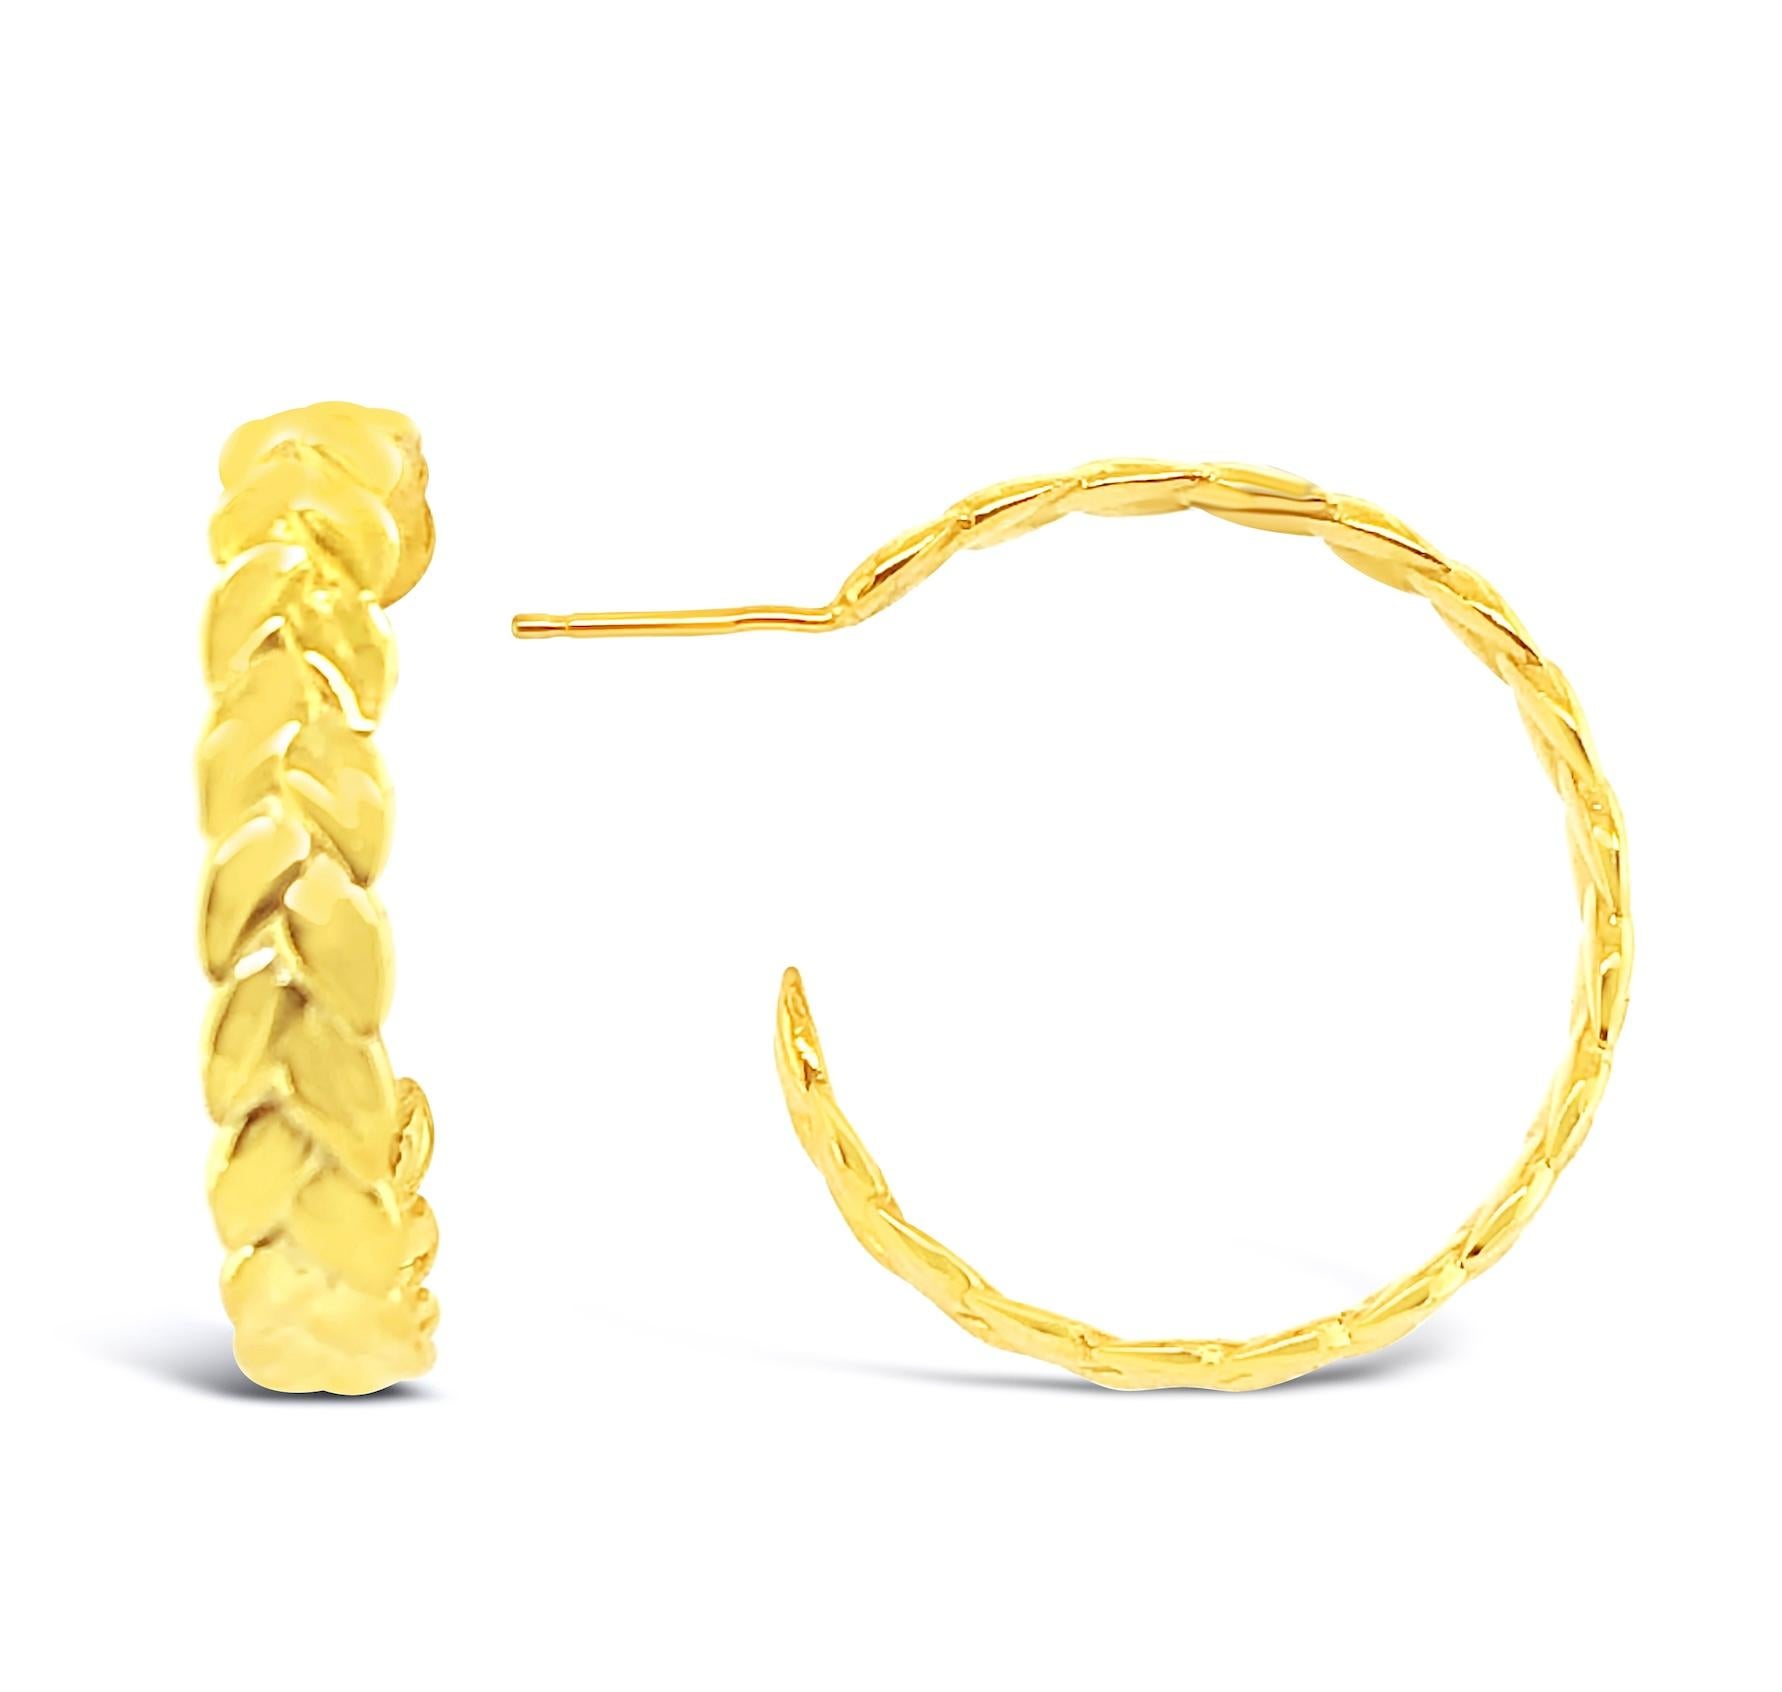 The classic hoop is refreshed with our wheat design. Terrific alone or as a layering piece with other earrings. Available in Sterling silver or 18Karat Yellow Gold Plate. Earring has a post and butterfly clasp. 
Hoops are one inch in diameter and